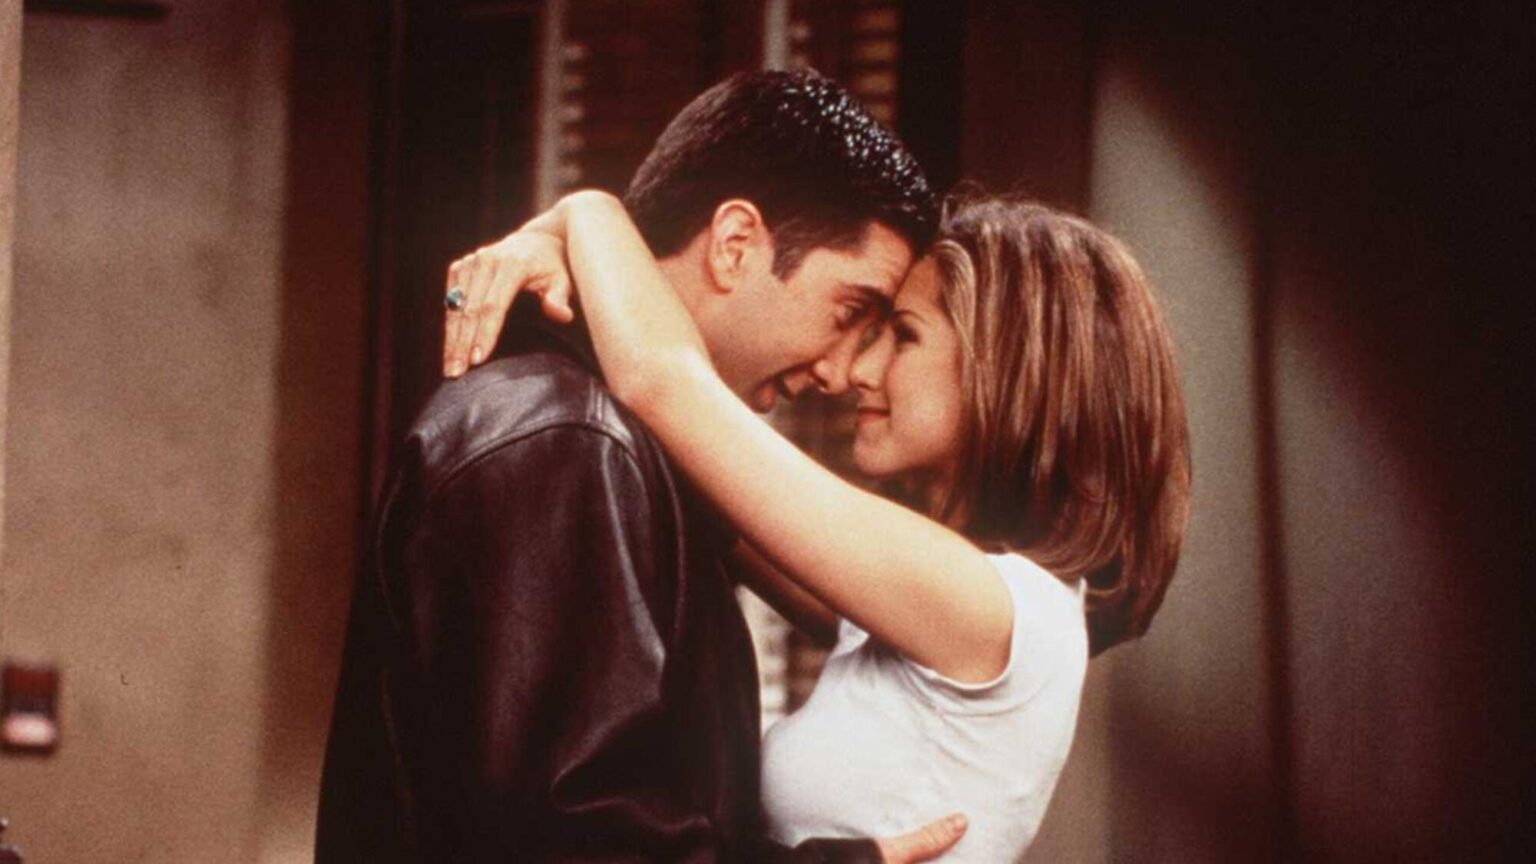 Could Rachel Green and Ross Geller actually be dating in real life? 'Friends' fans are freaking out. Find out who Jennifer Aniston is really dating here.